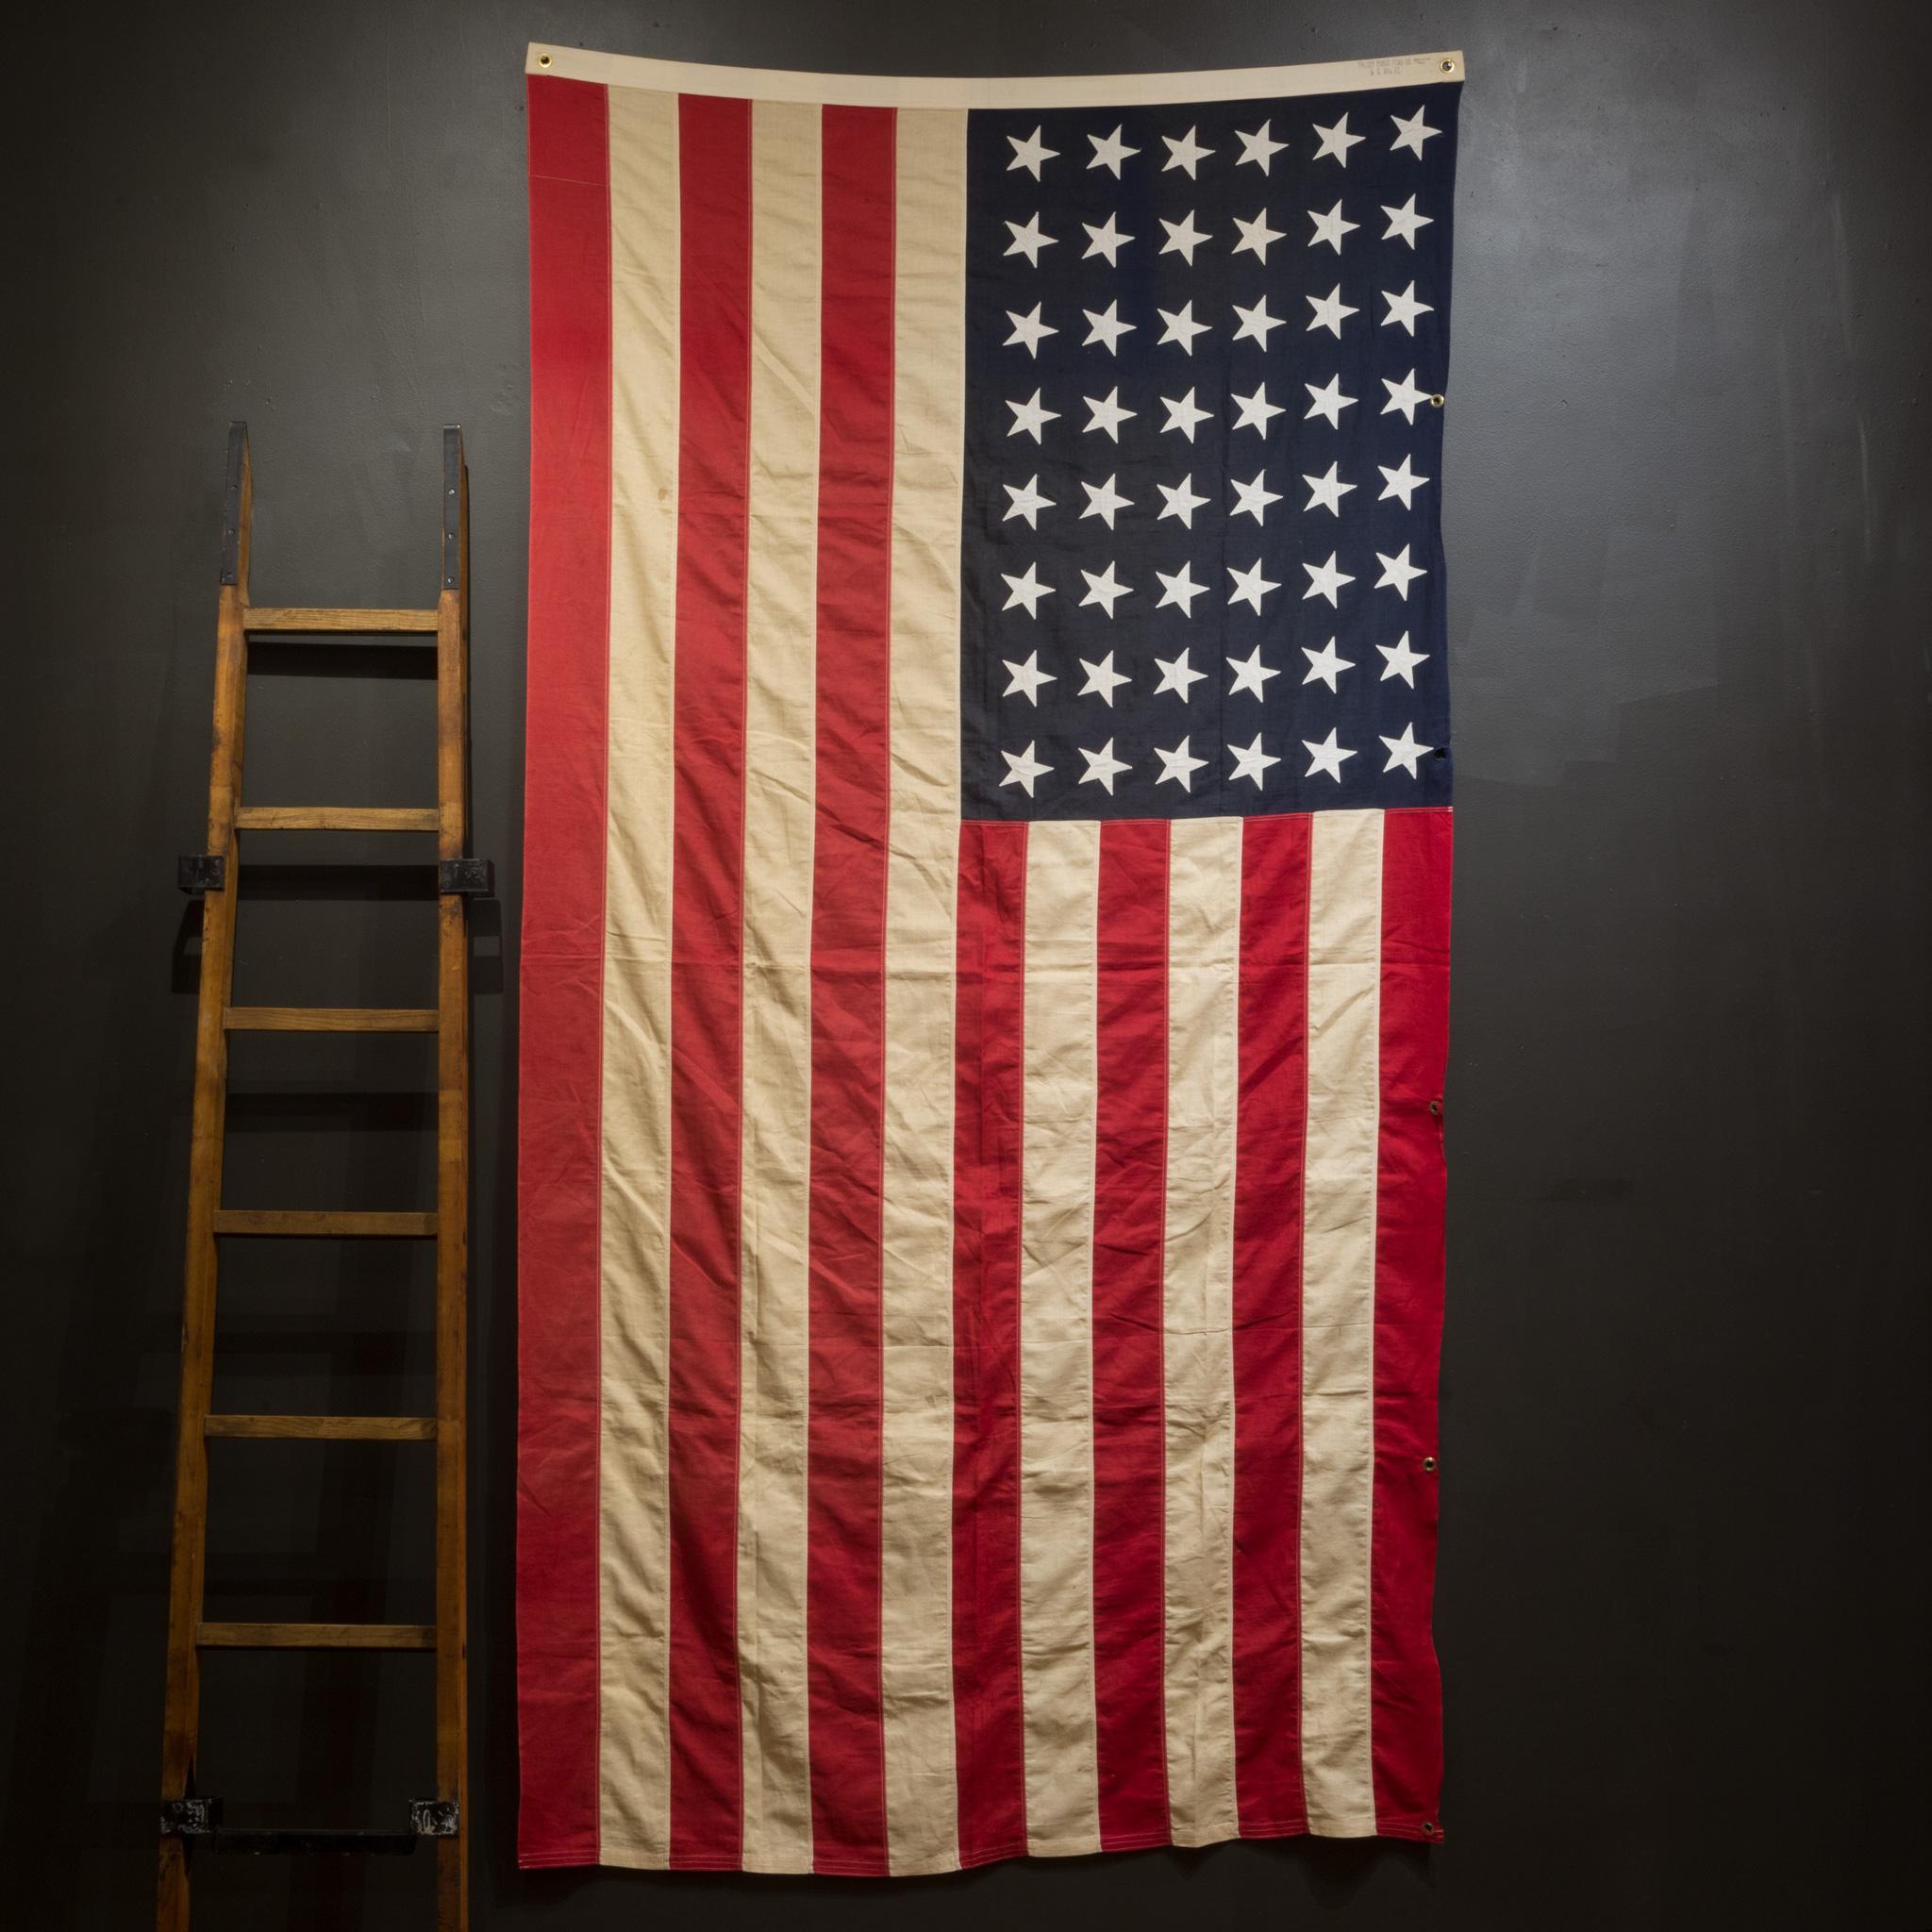 ABOUT

This will ship parcel. Contact us for more affordable options: S16 Home San Francisco. 

This is an original monumental American flag made by Valley Forge Co. with 48 stars and stripes and brass grommets.

    CREATOR Valley Forge Co.
   